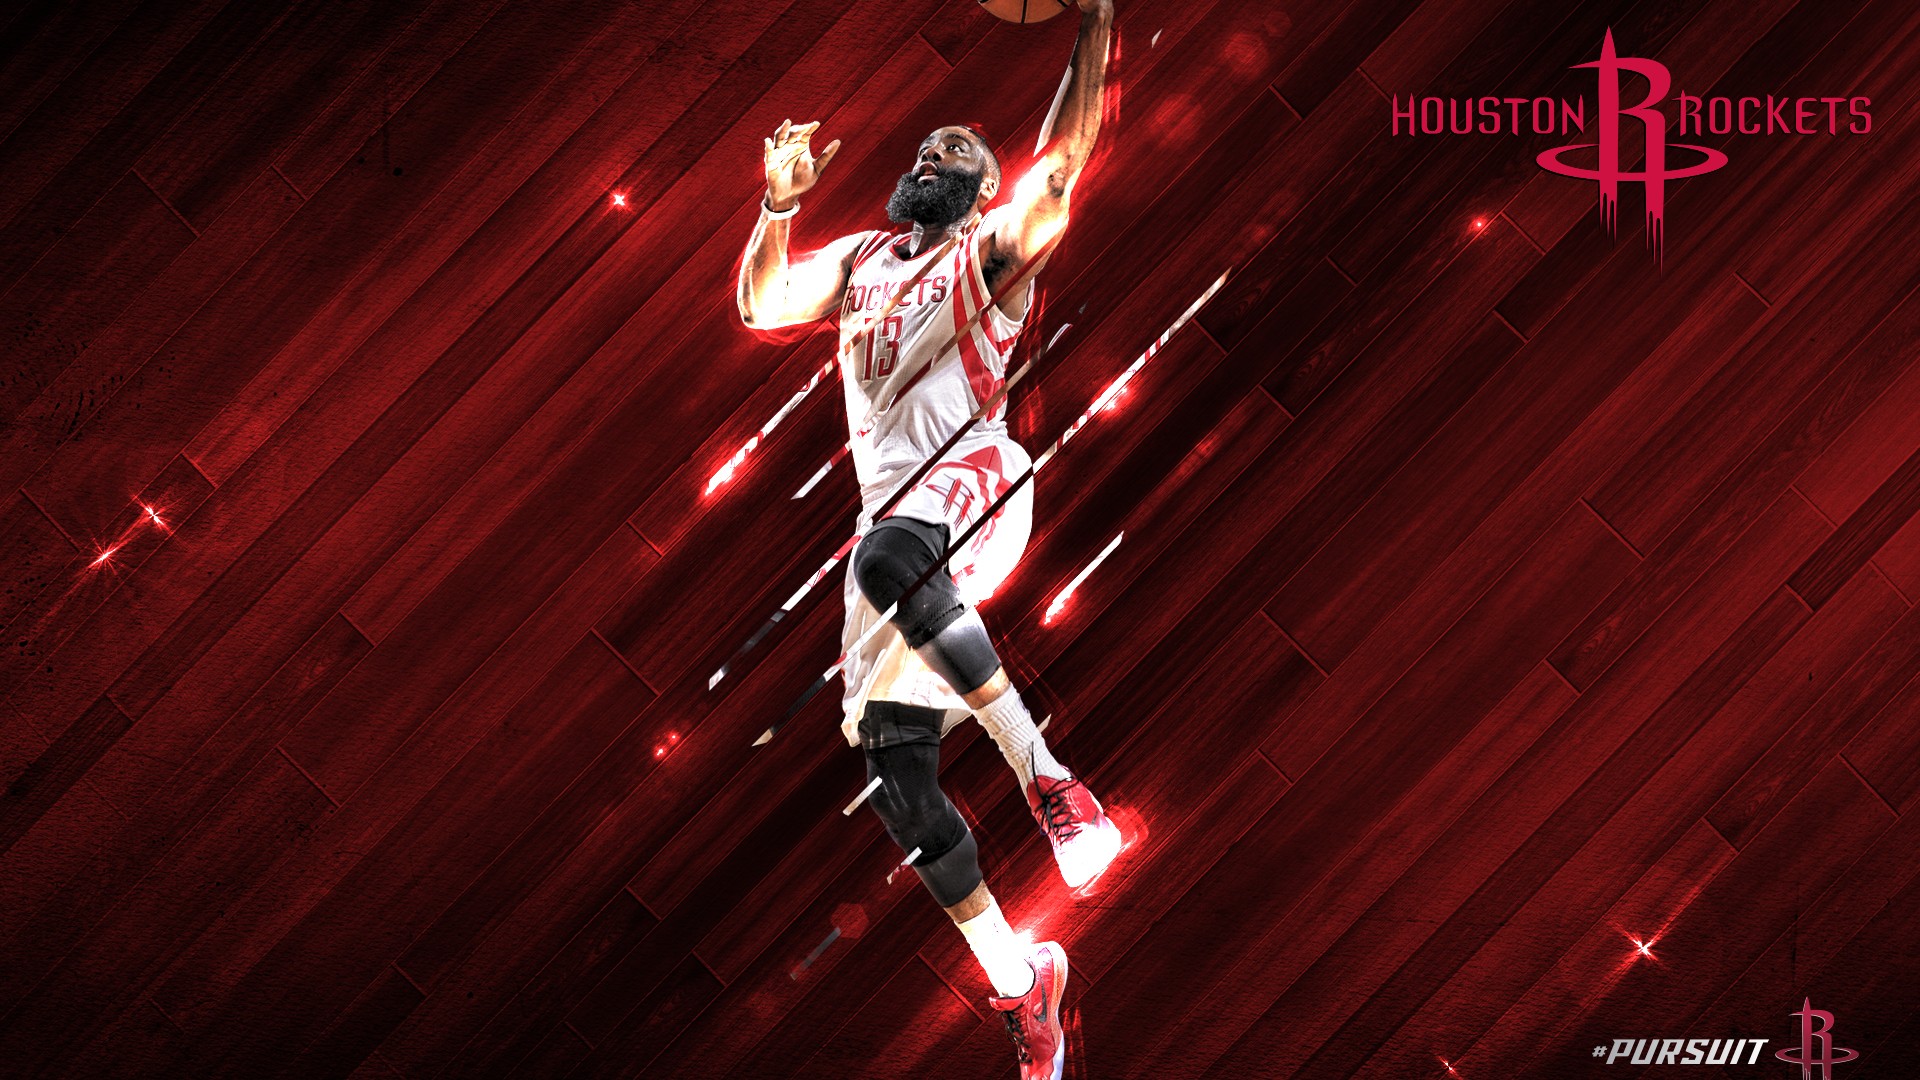 James Harden Beard Desktop Wallpaper with image dimensions 1920x1080 pixel. You can make this wallpaper for your Desktop Computer Backgrounds, Windows or Mac Screensavers, iPhone Lock screen, Tablet or Android and another Mobile Phone device